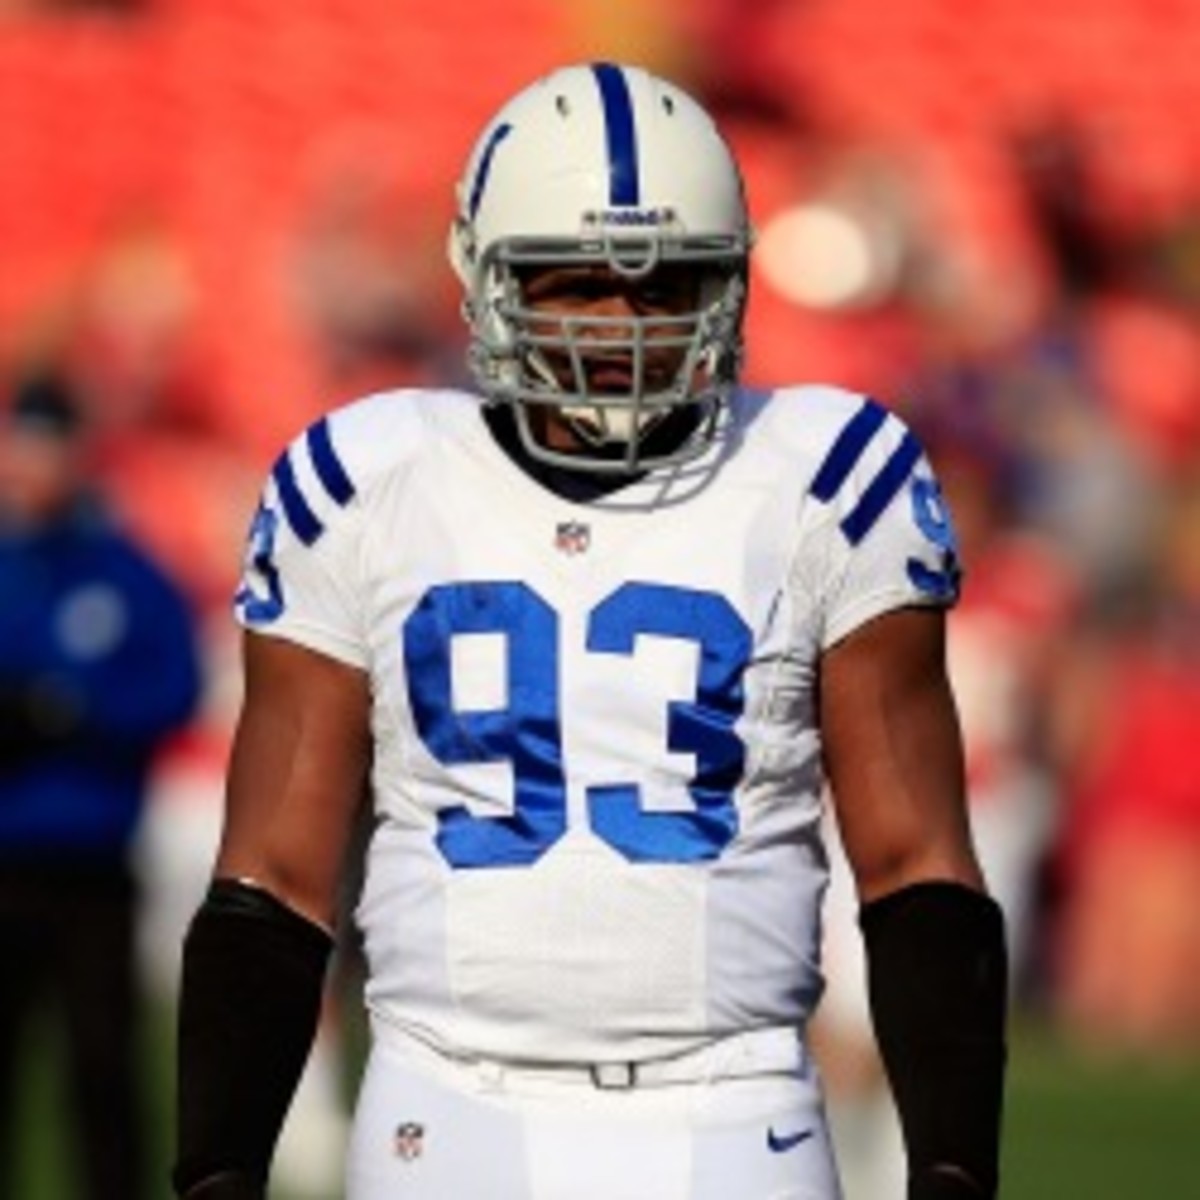 The Colts part ways with defensive end Dwight Freeney after 10 seasons. (Jamie Squire/Getty Images)